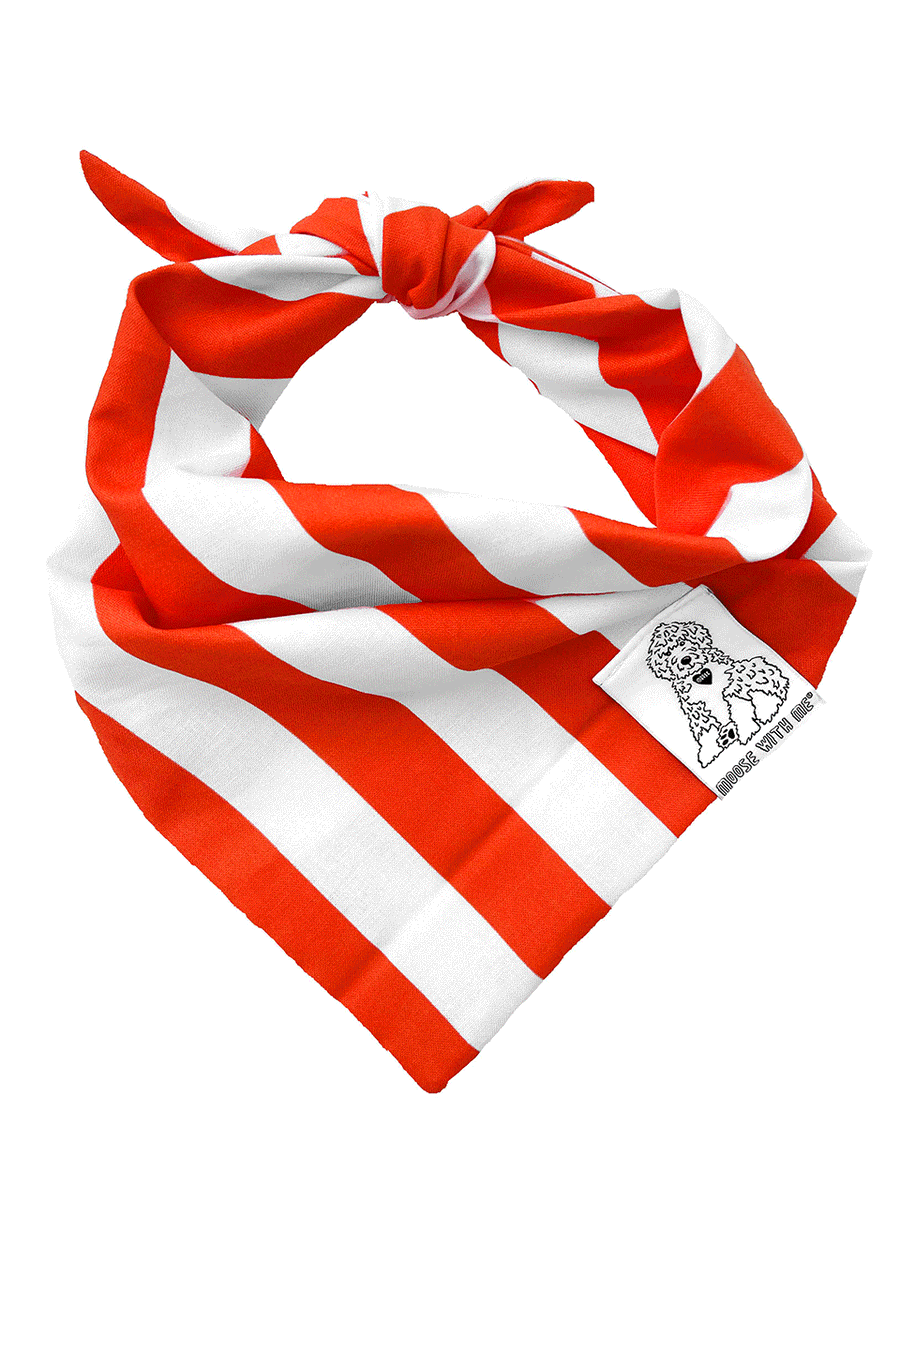 Dog Bandana Stripes - Customize with Interchangeable Velcro Patches